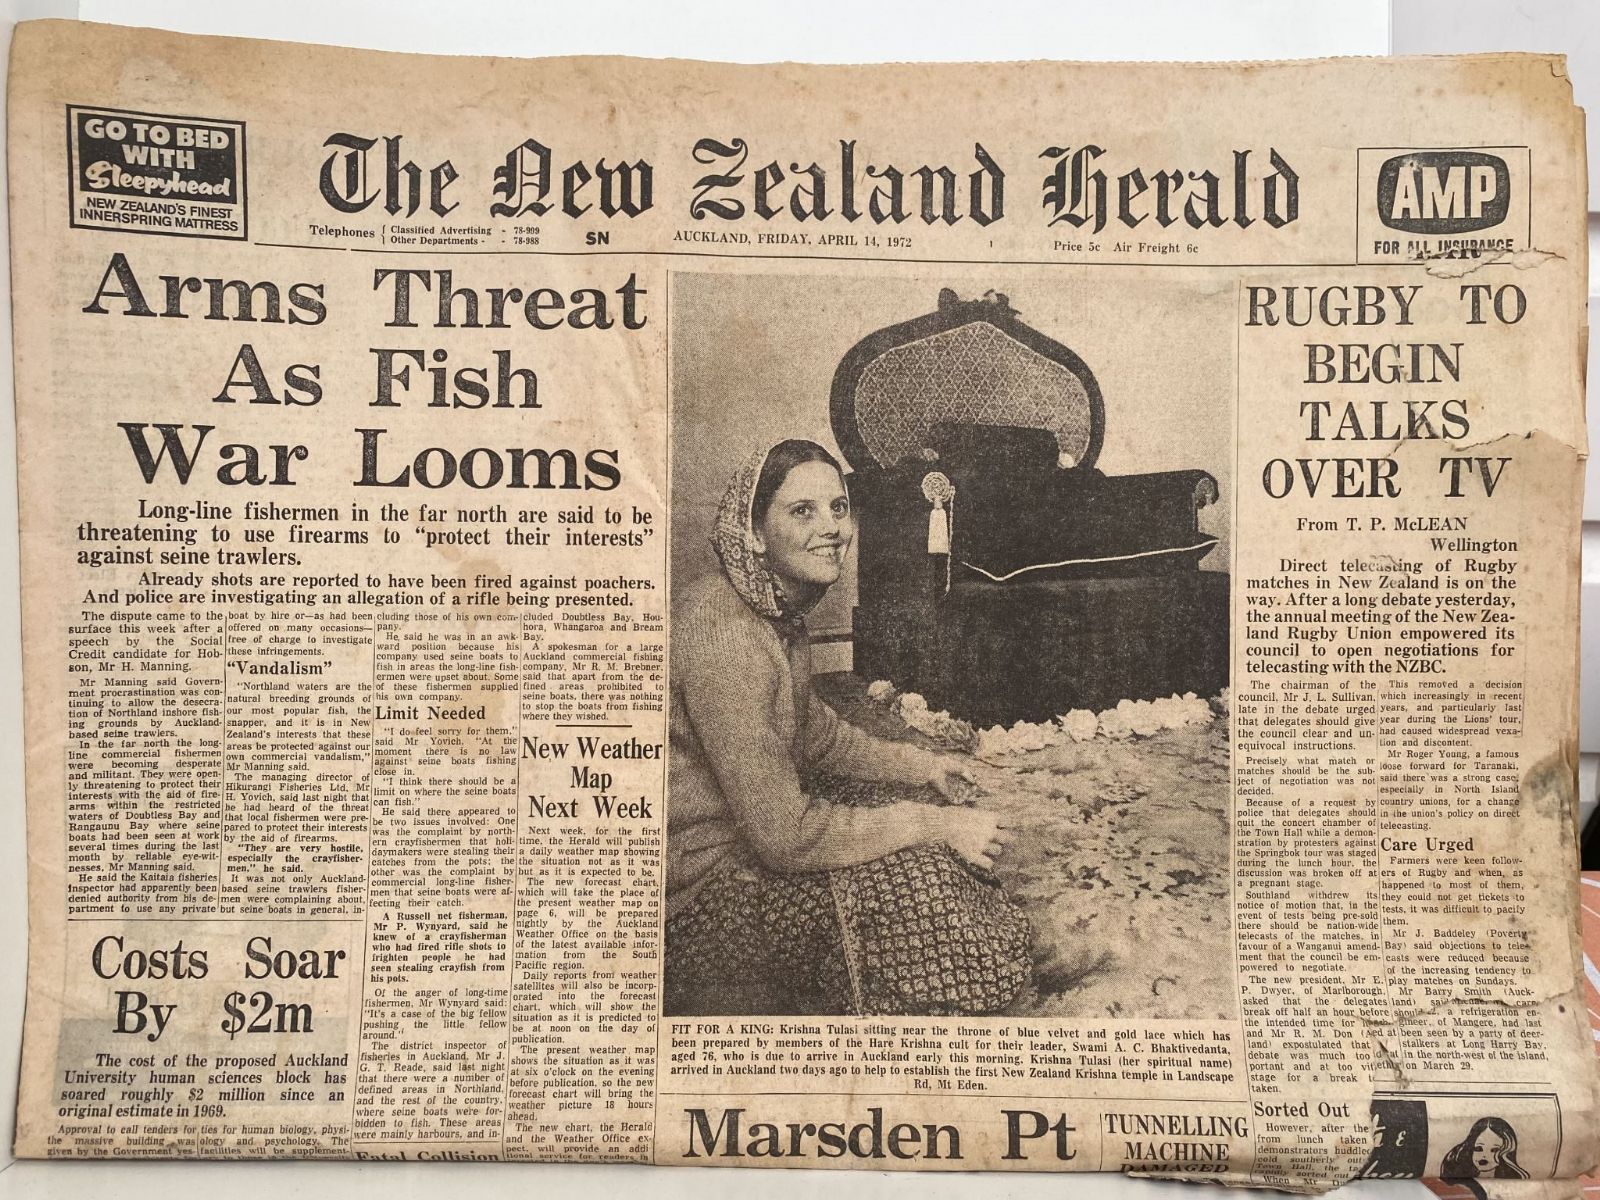 OLD NEWSPAPER: The New Zealand Herald, 14 April 1972